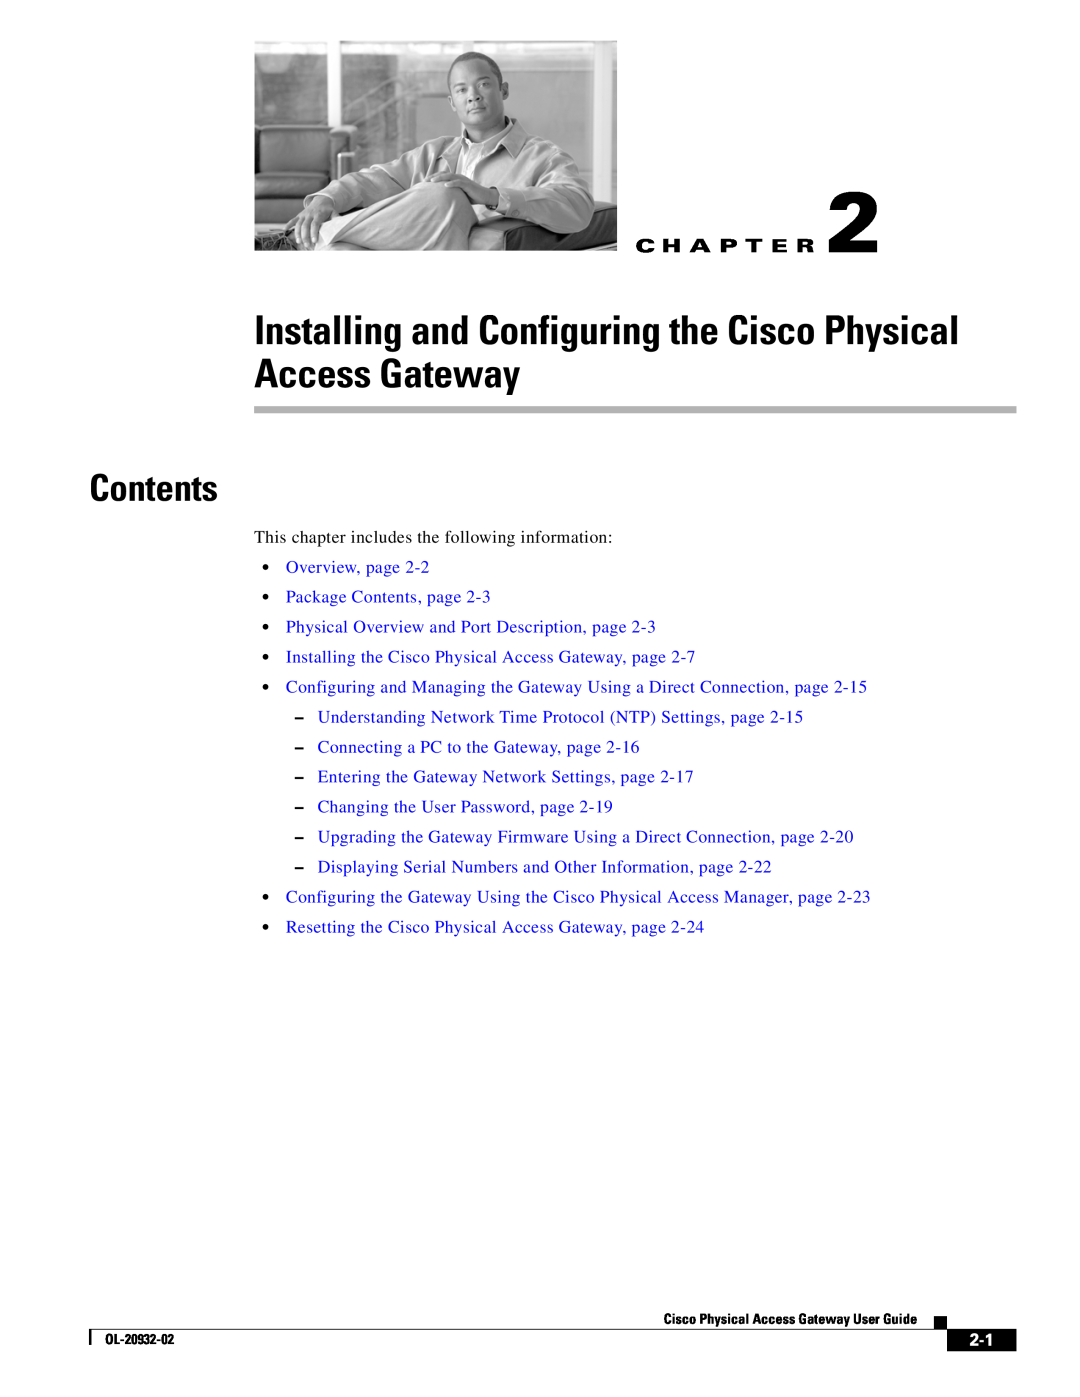 Cisco Systems OL-20932-02 manual Installing and Configuring the Cisco Physical Access Gateway, Contents, C H A P T E R 